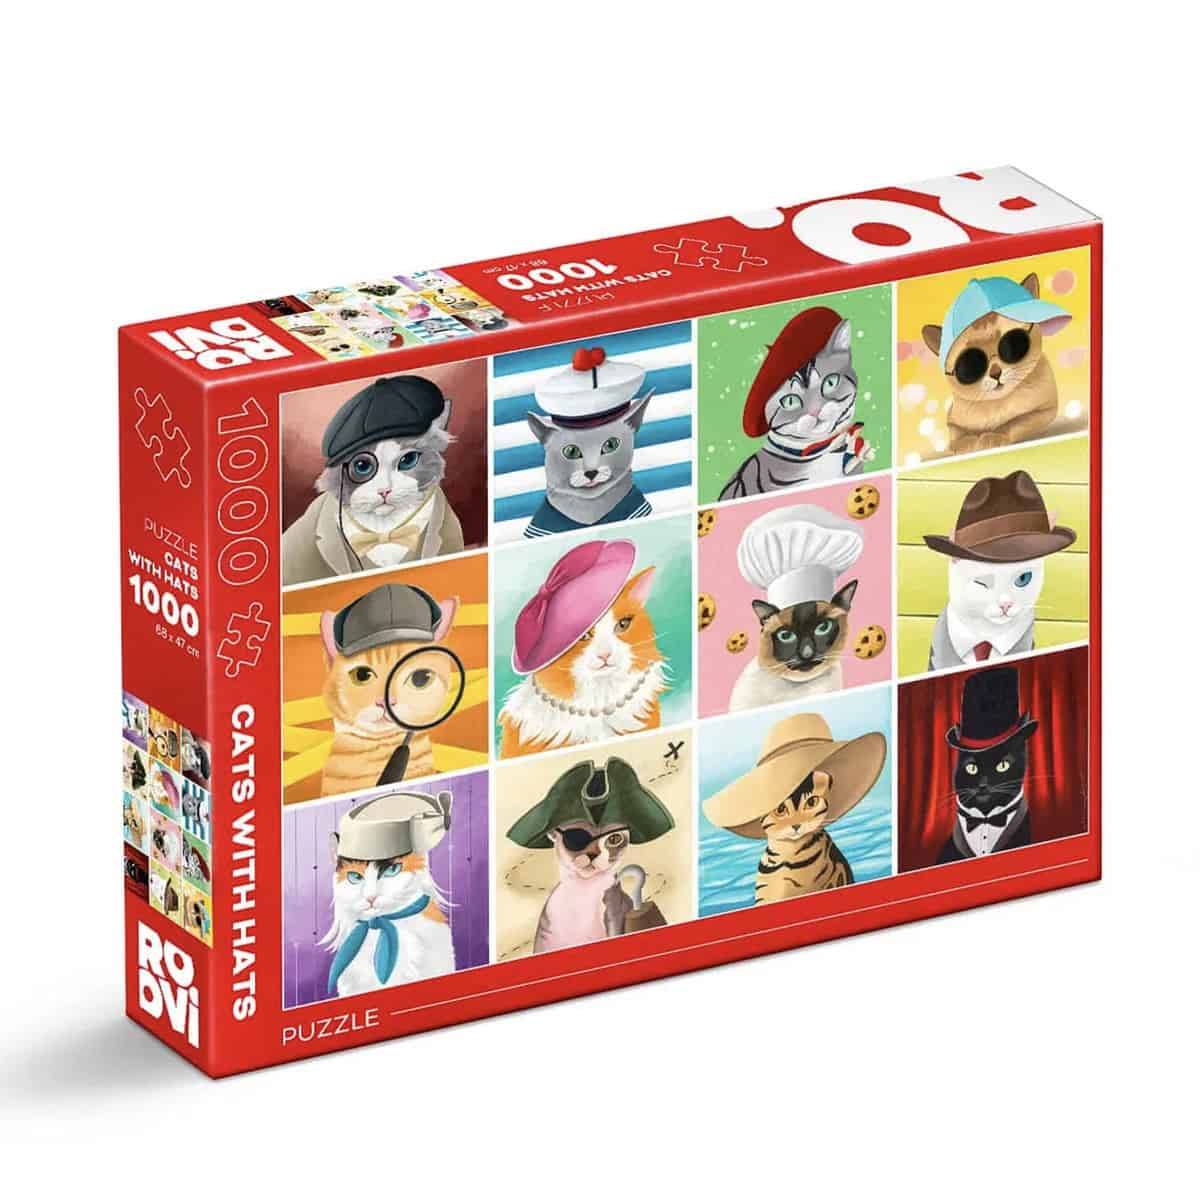 Puzzle Cats with hats, illustration by Cynthia Artstudio